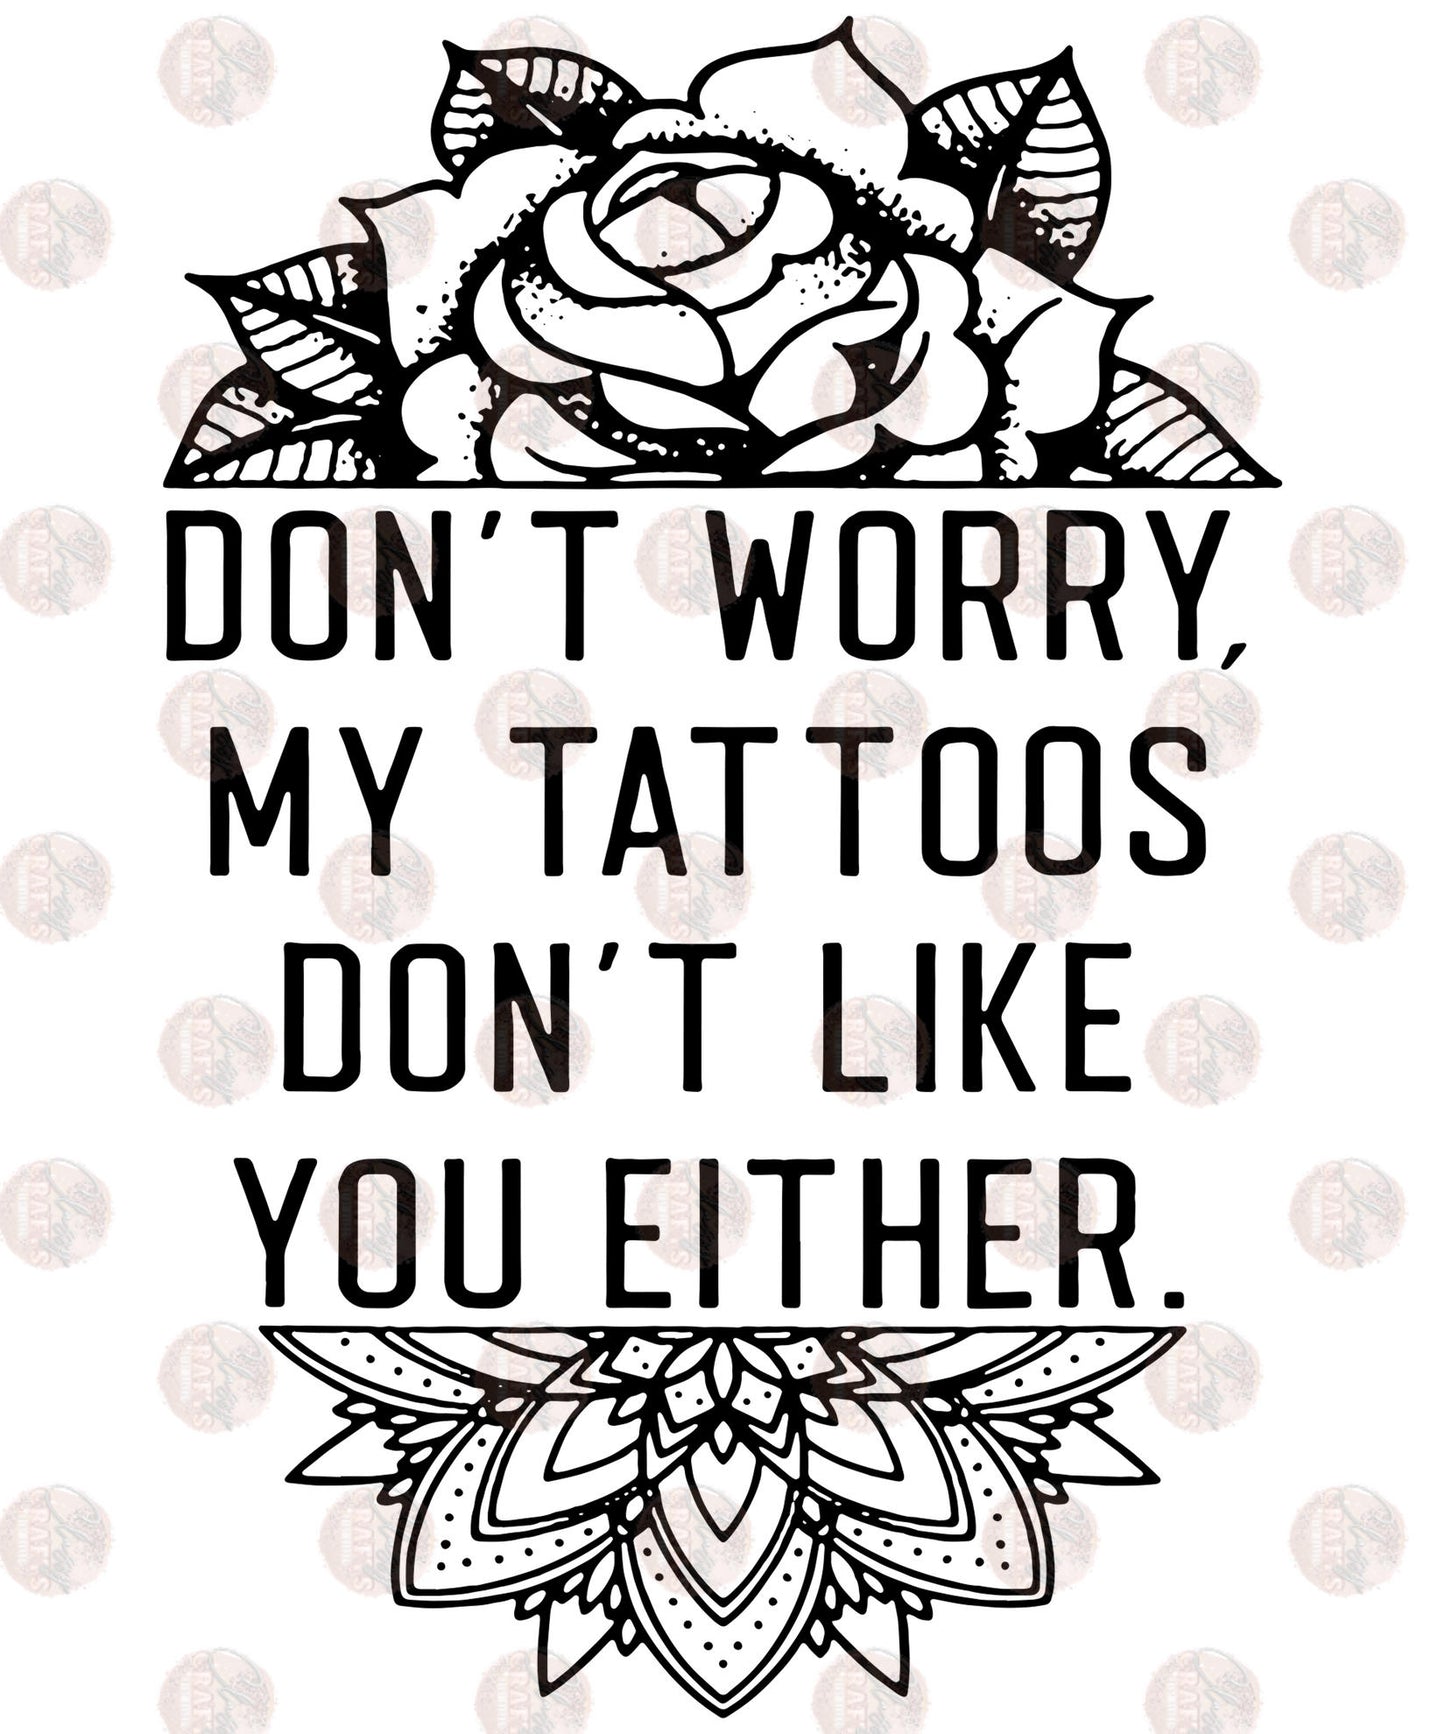 My Tattoo's Don't Like You Either - Sublimation Transfer